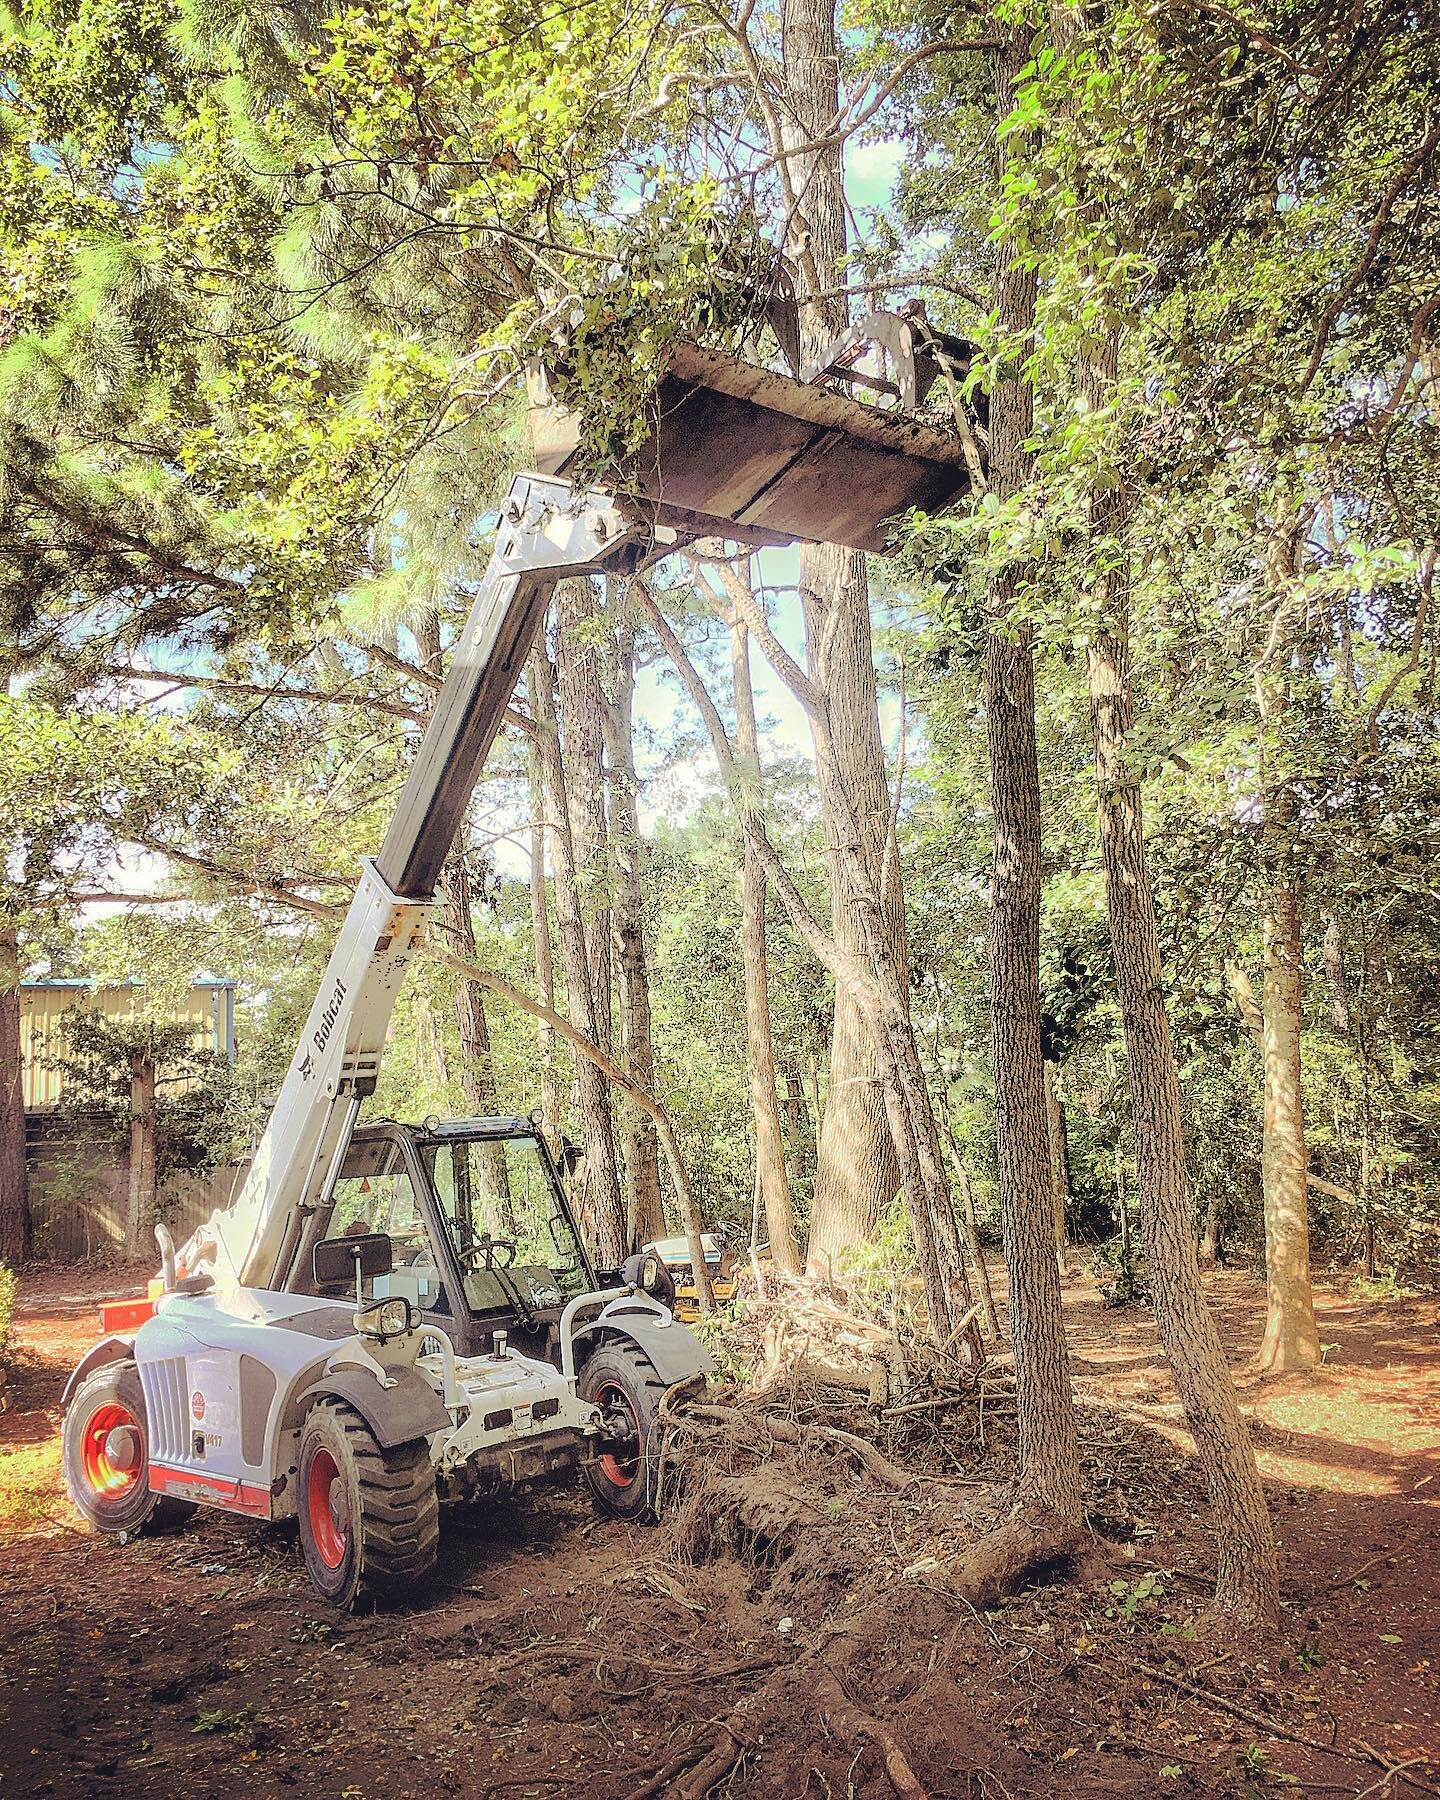 Push it over... pull it out... lay it down. Easy peasy #telehandler #stihlms462 #lotclearing #treework #heavyequipment #bobcatequipment #undergroundmachineworks #obx #outerbanks #treeservice #landscaping #localasitgets #coastalnc #forestry #landmanag